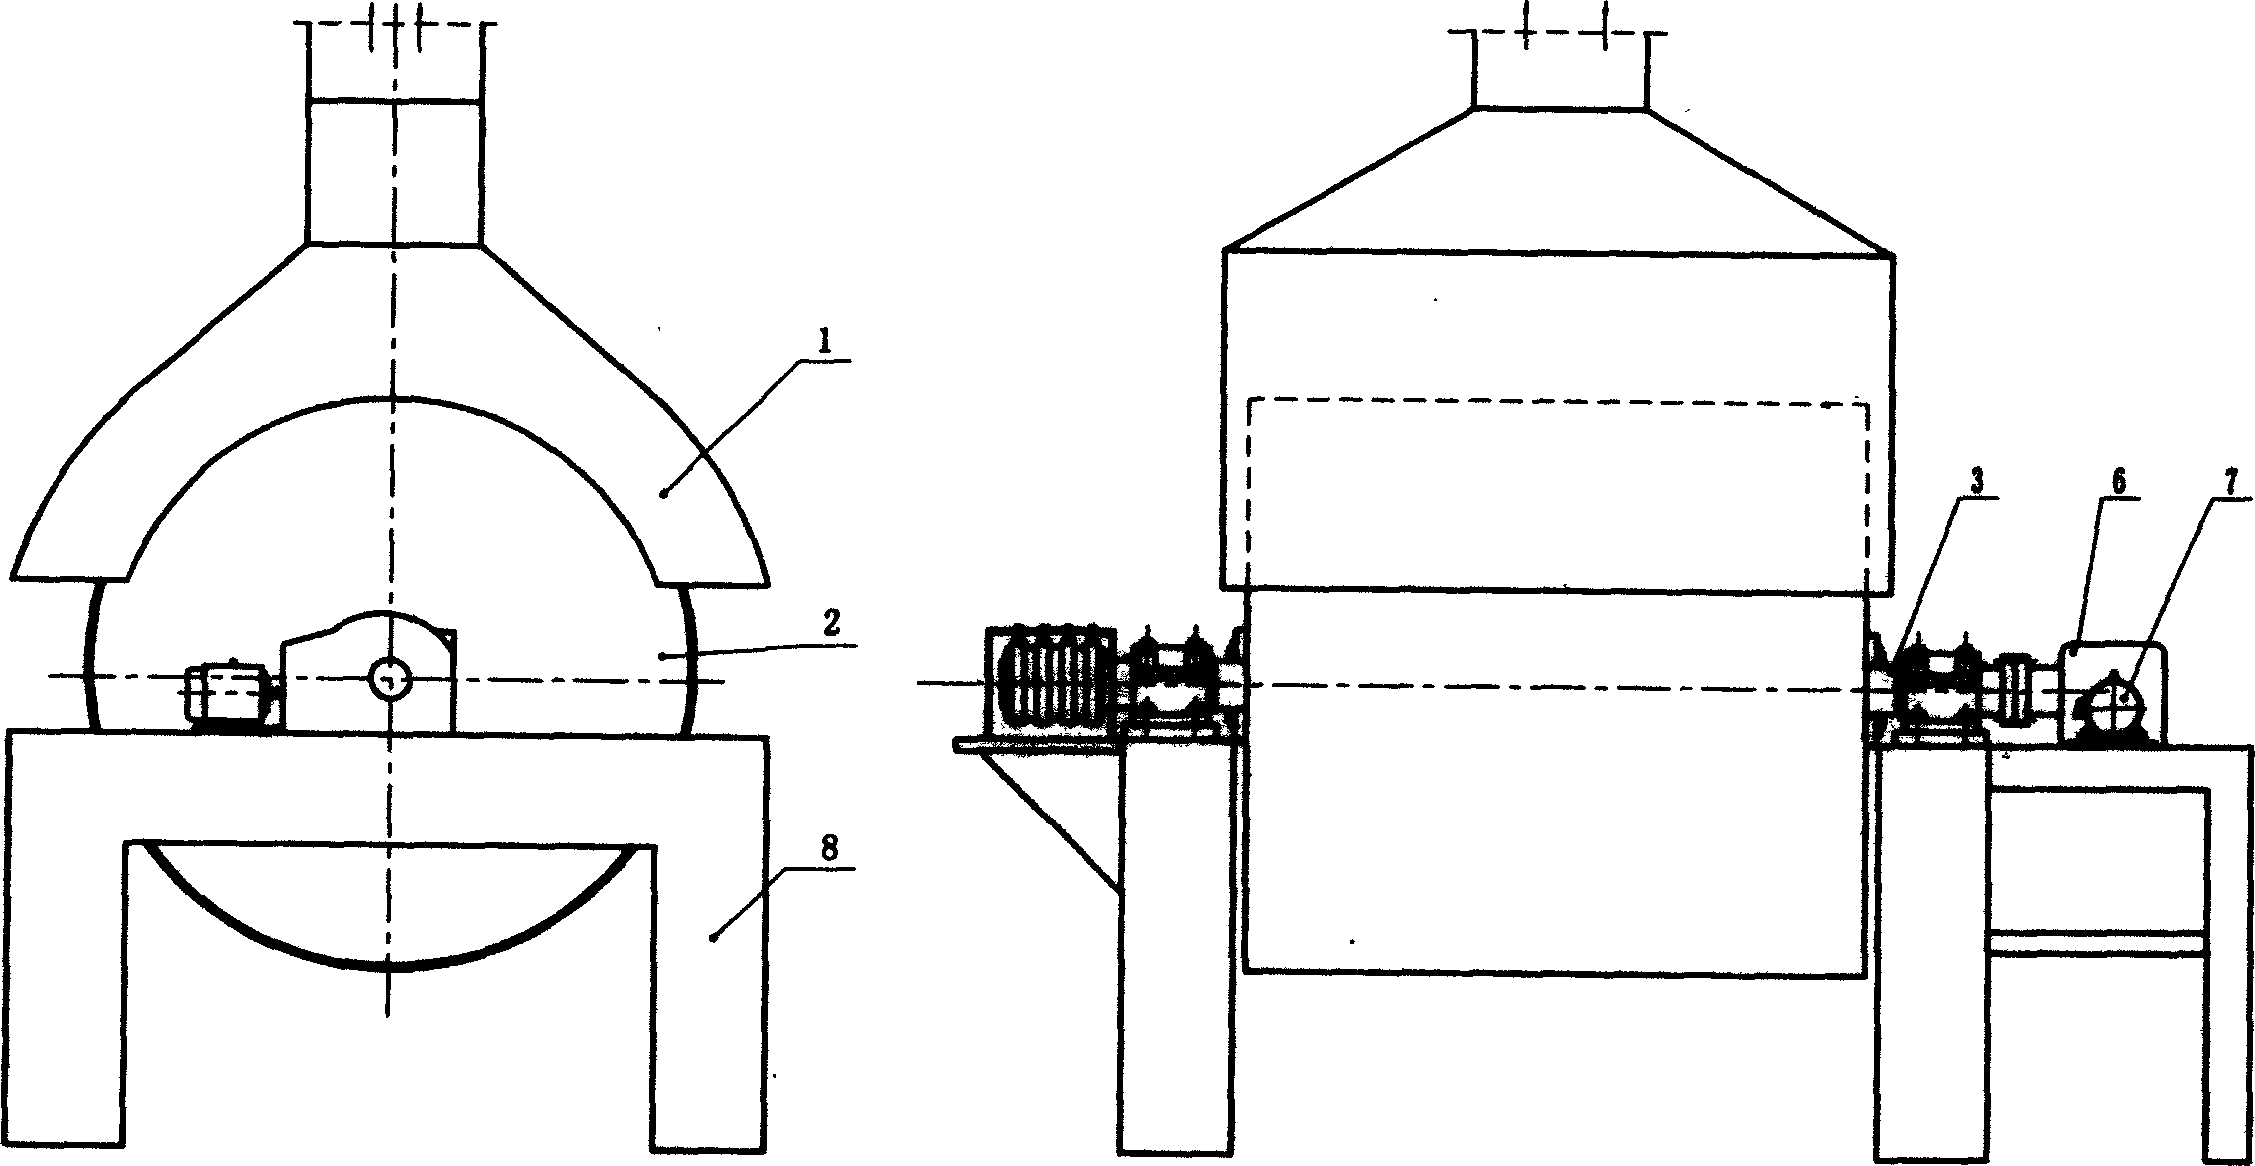 Electromagnetic induction dryer